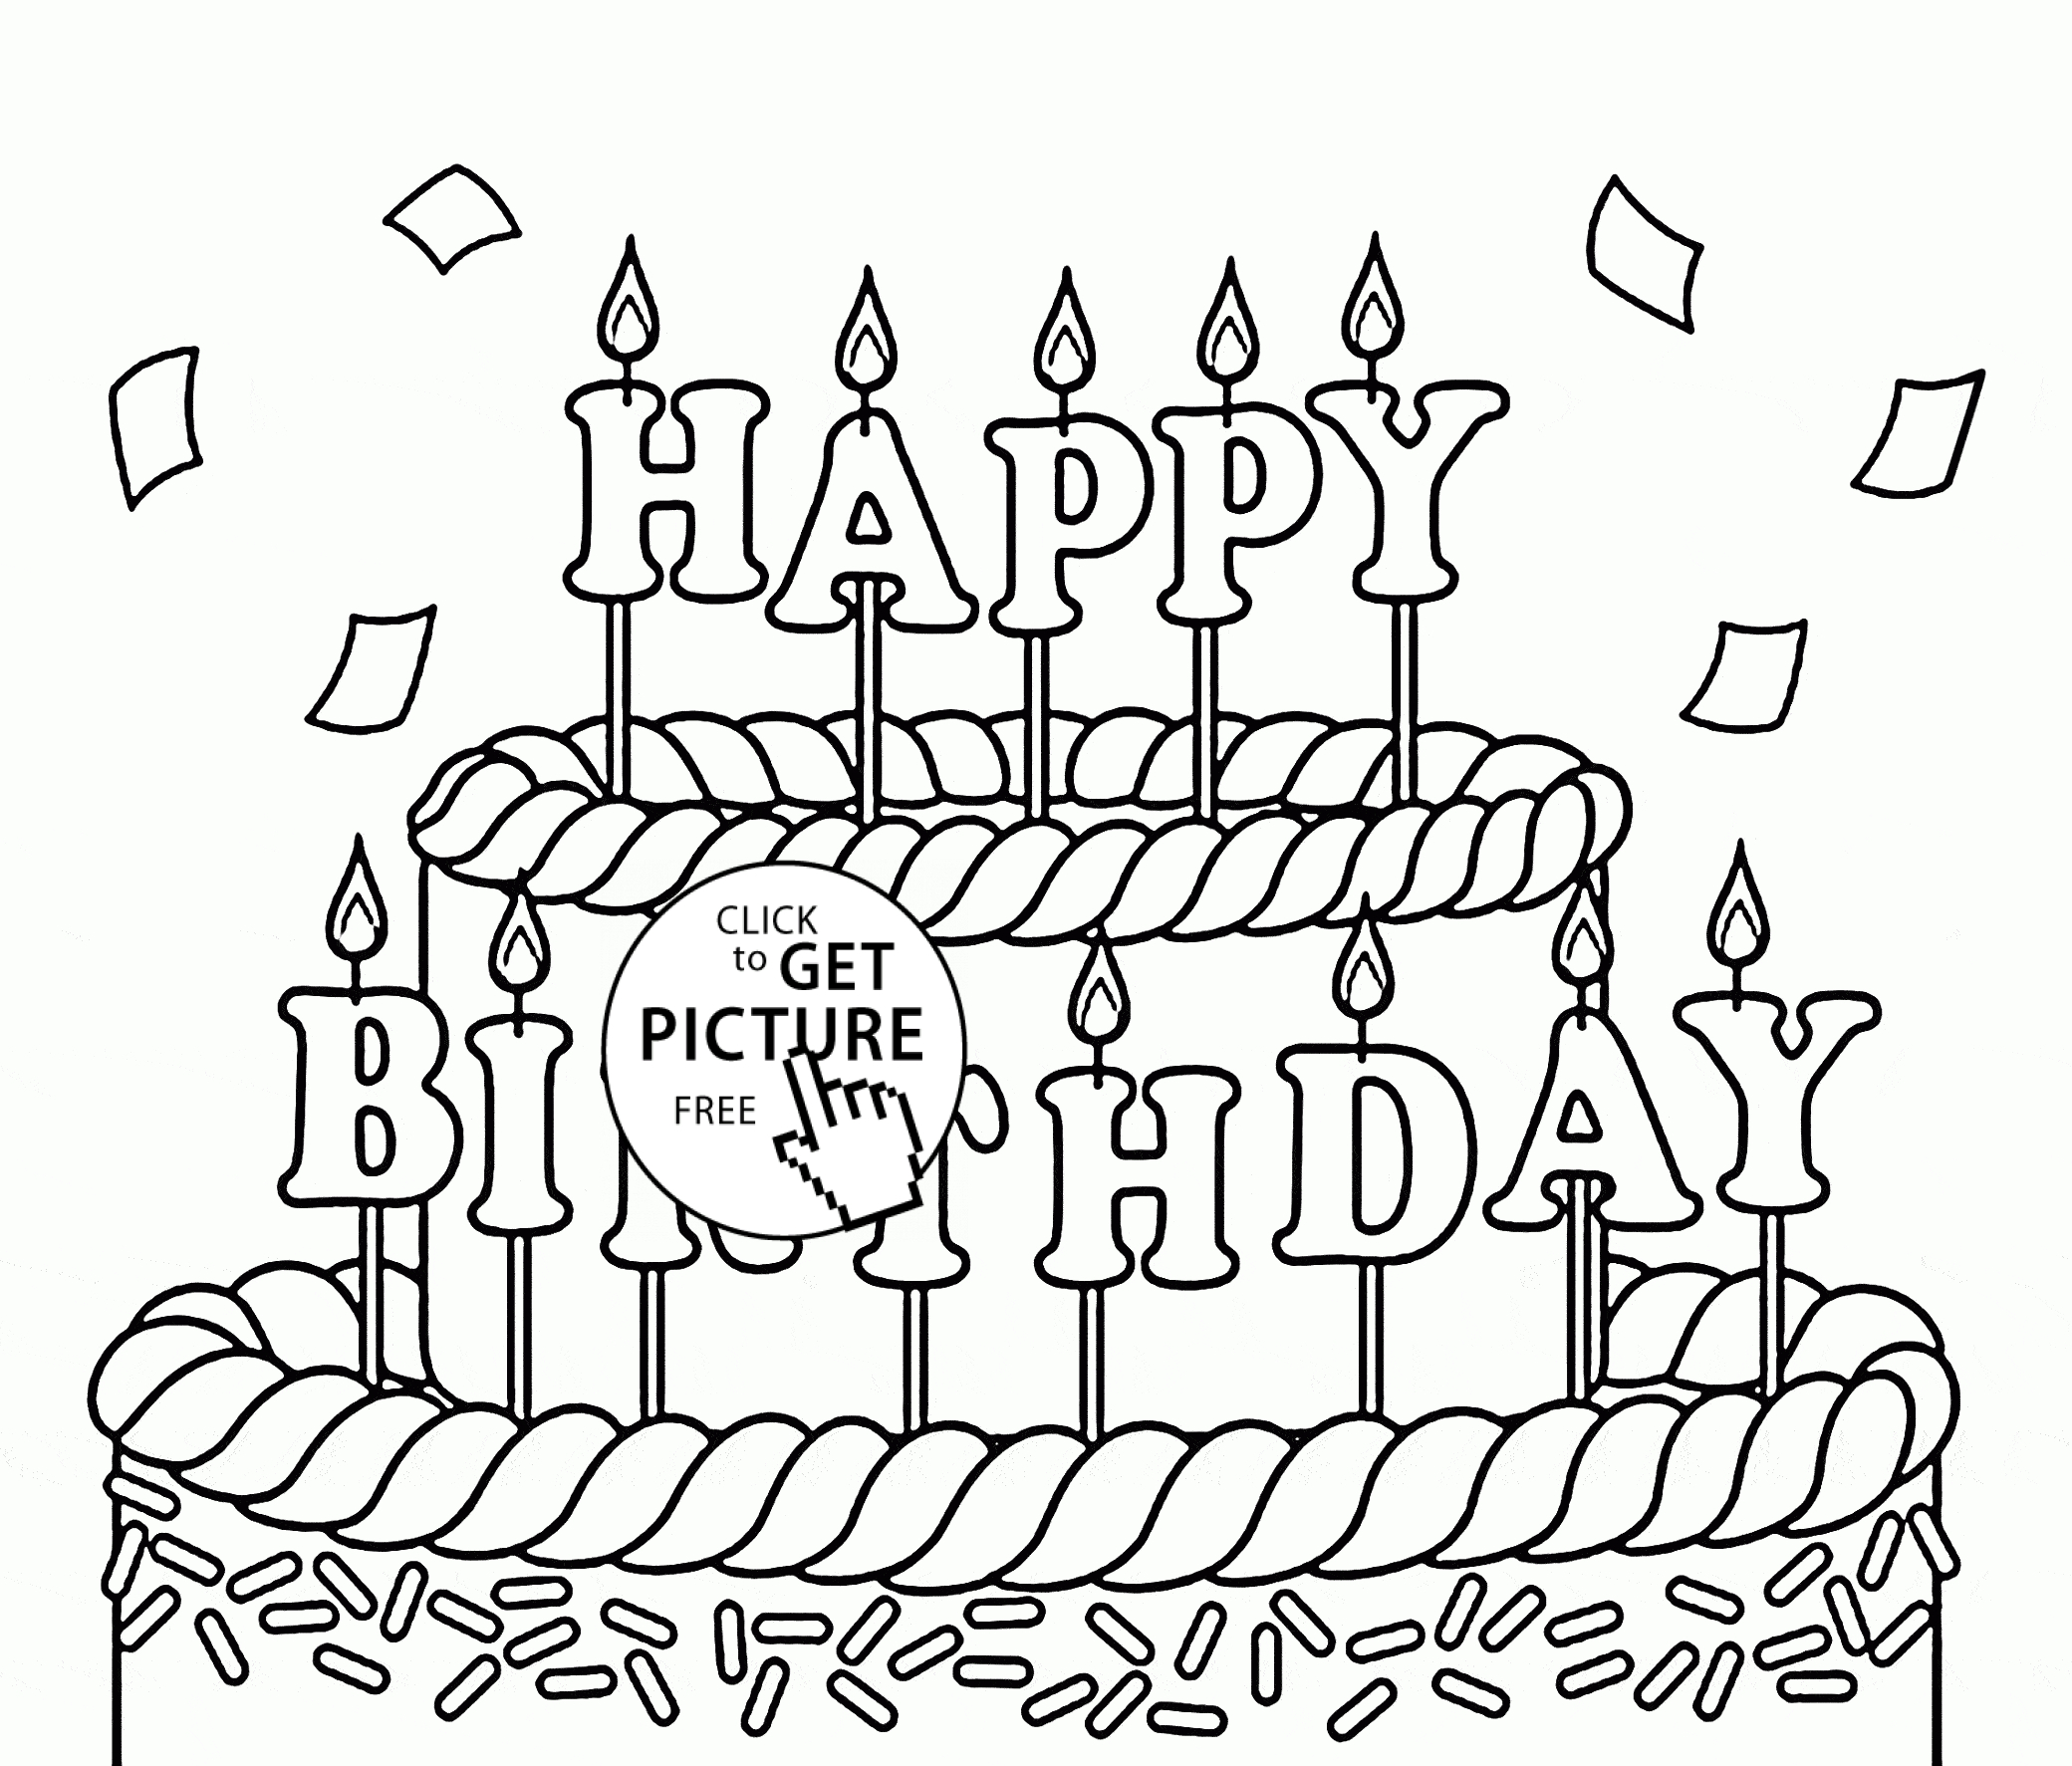 Happy Birthday Coloring Pages To Print Big Cake Happy Birthday Coloring Page For Kids Holiday Coloring